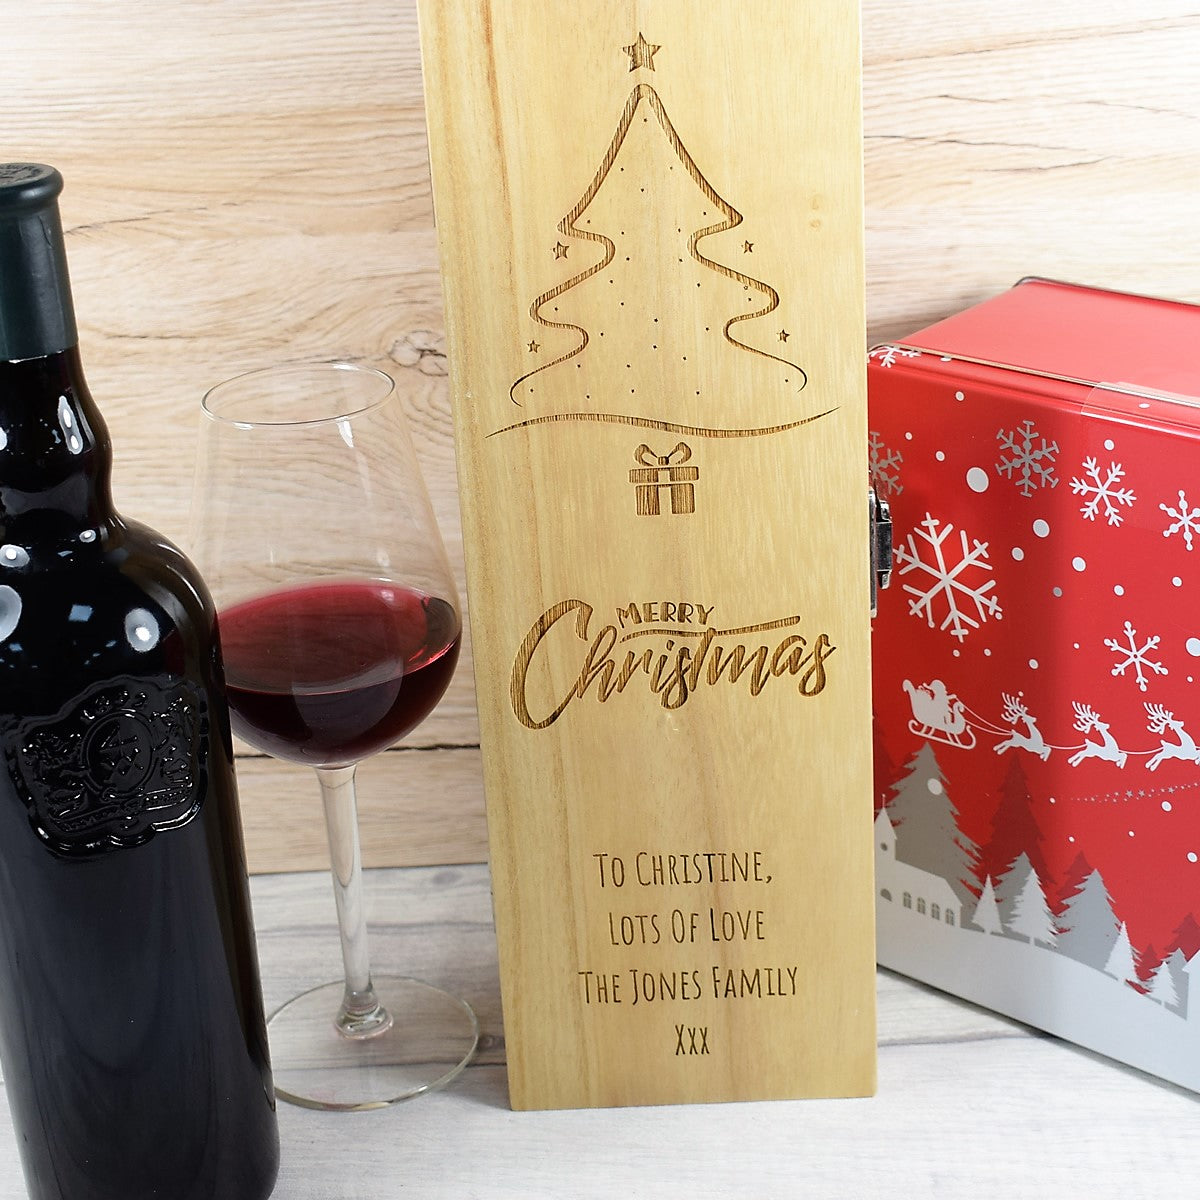 Personalised Wooden Wine Box, Christmas Wine Gifts  - Xmas Tree 2